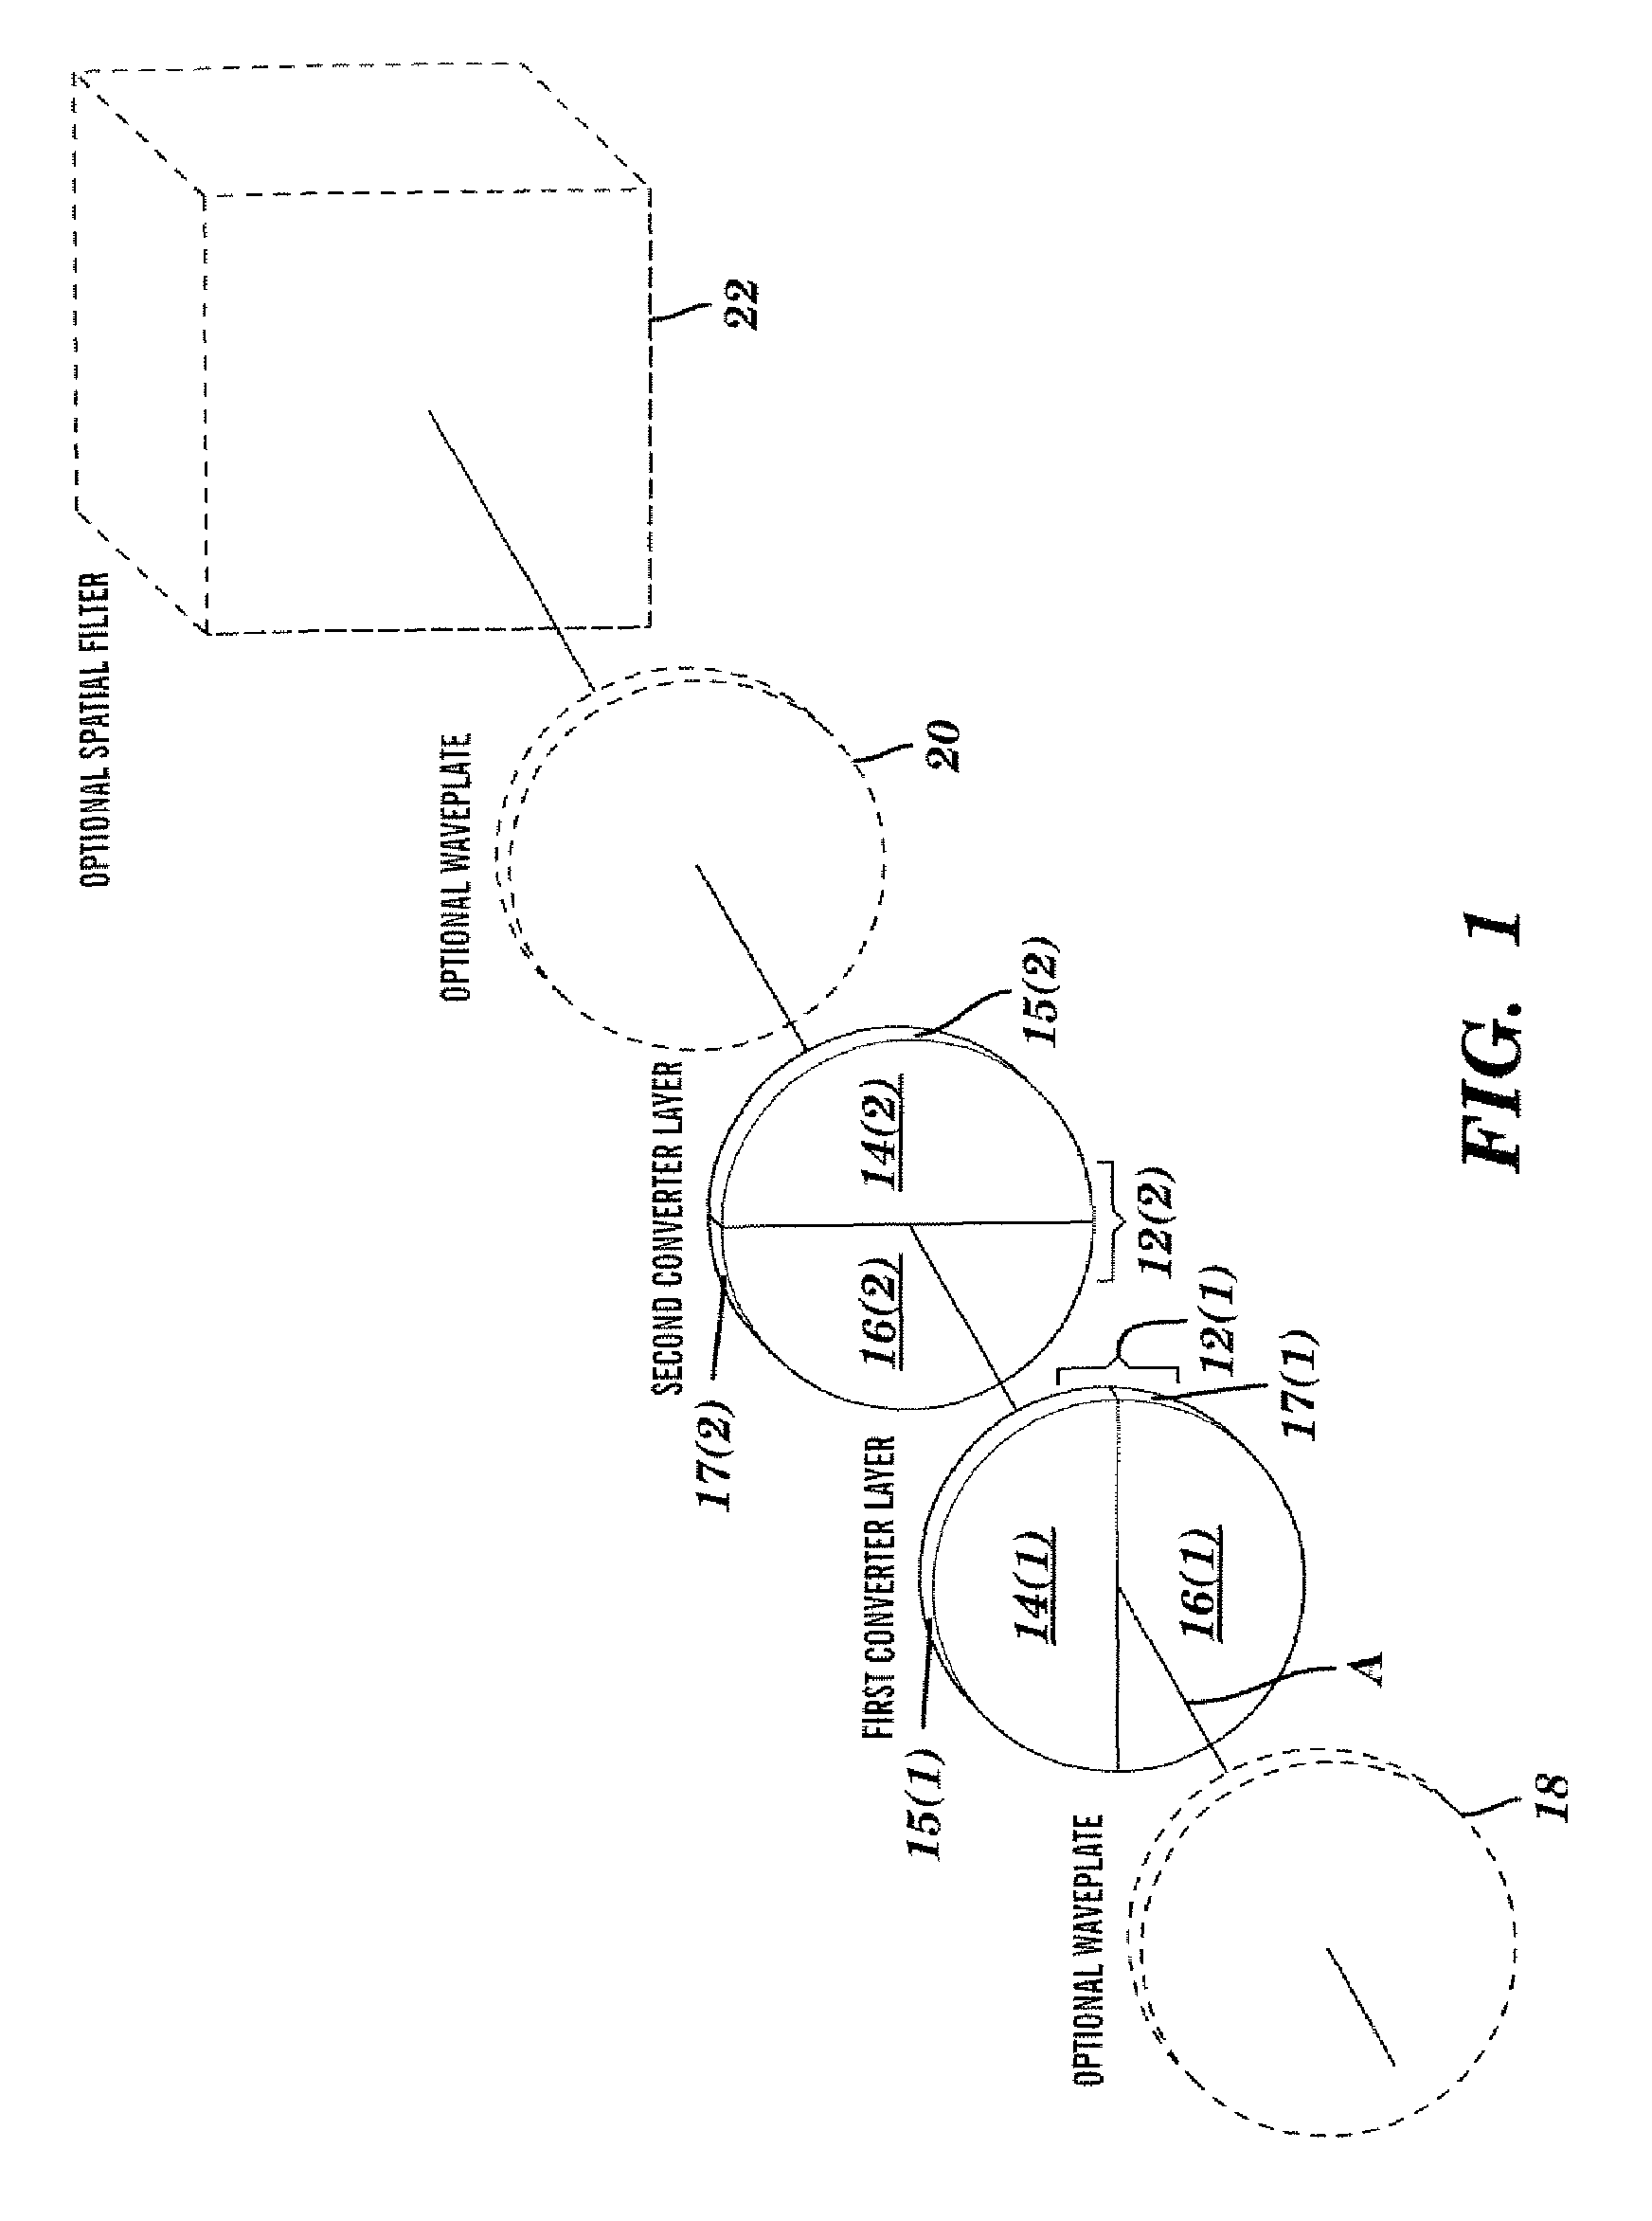 System and method converting the polarization state of an optical beam into an inhomogeneously polarized state